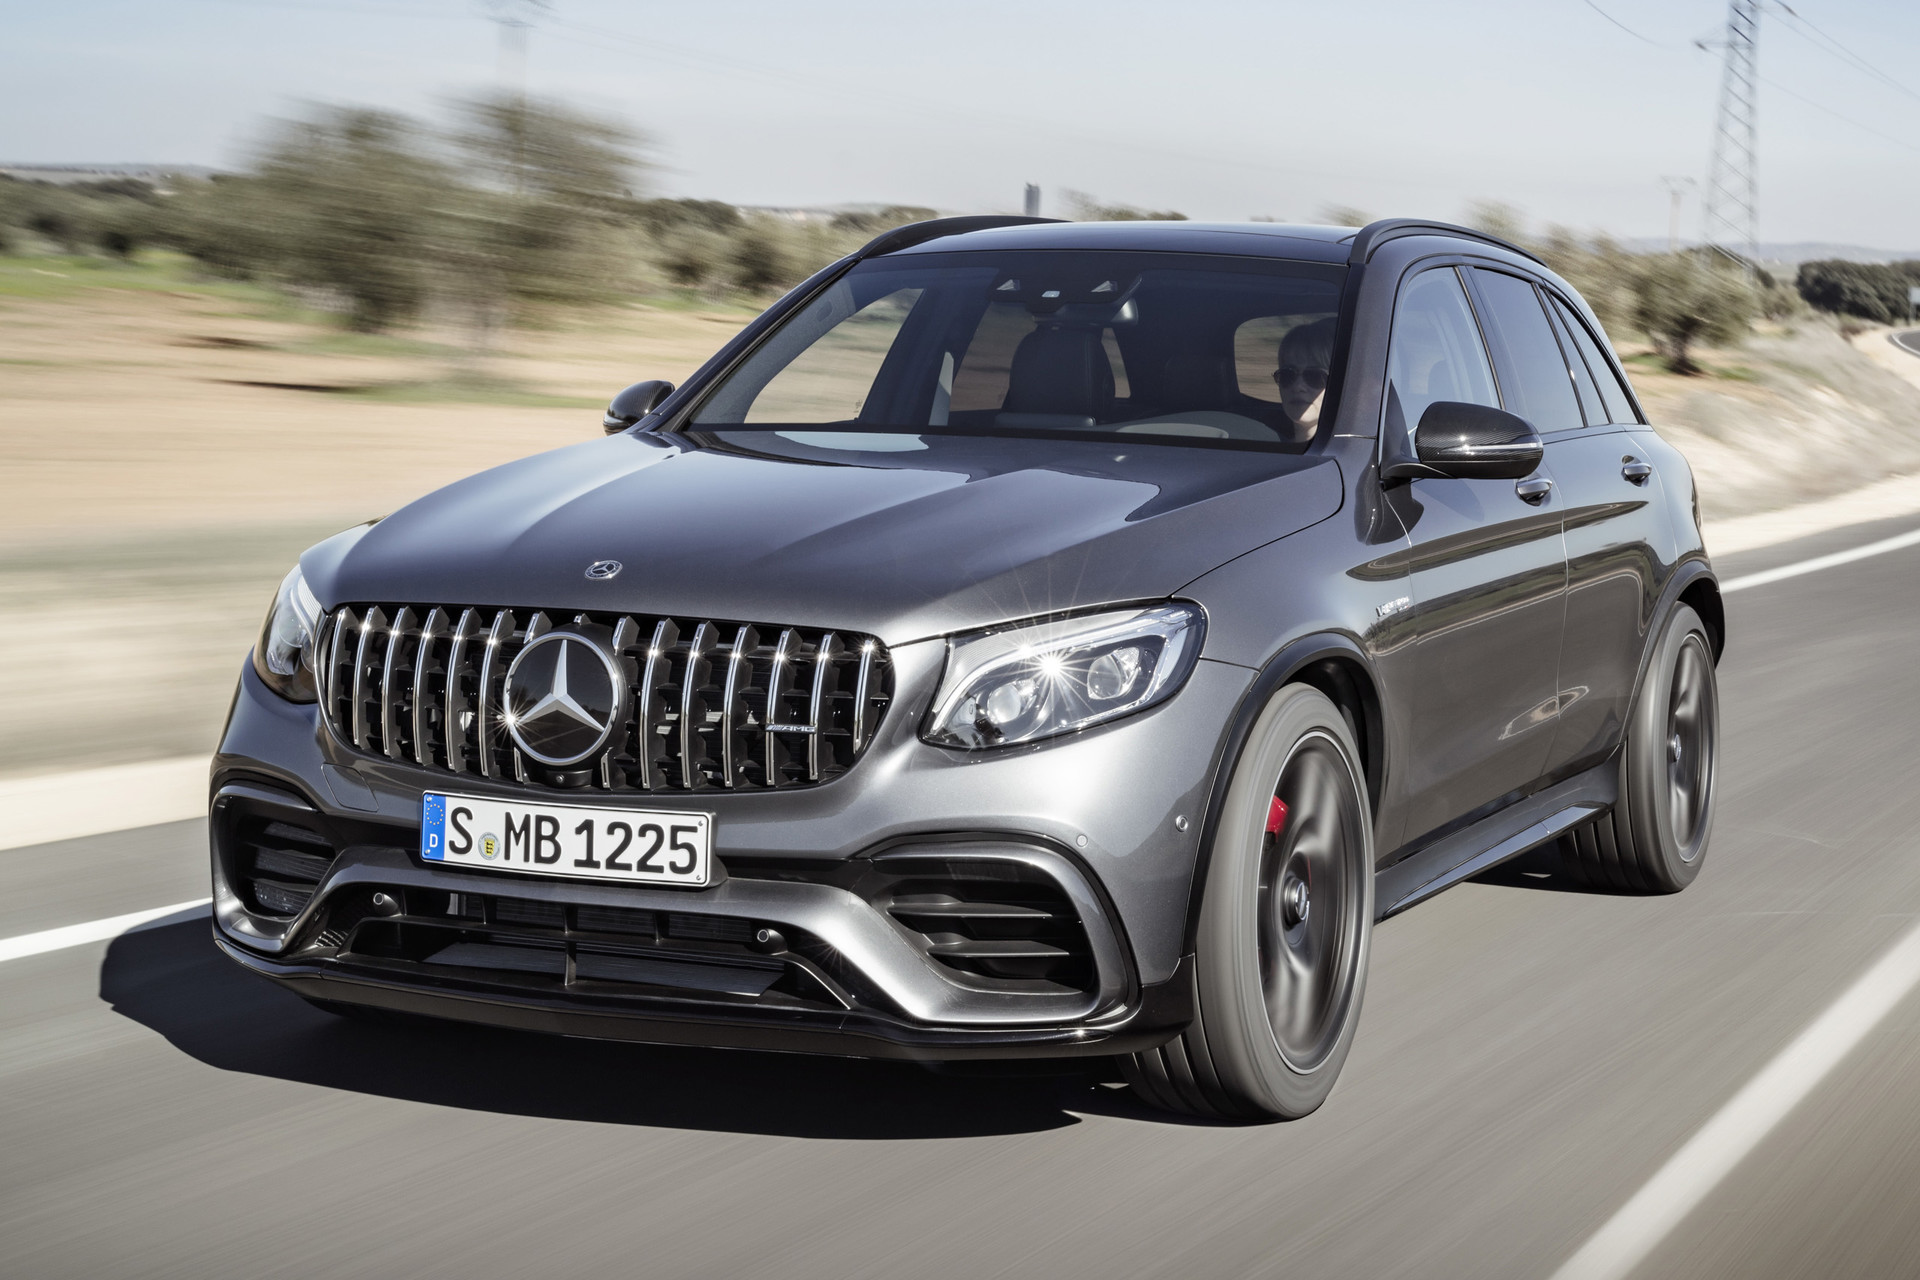 Mercedes Benz GLC 63 S AMG Bosch MED17.7 SW: 026832 - Pops and Bangs on Sport+ and Race only  by ChiptuneRS